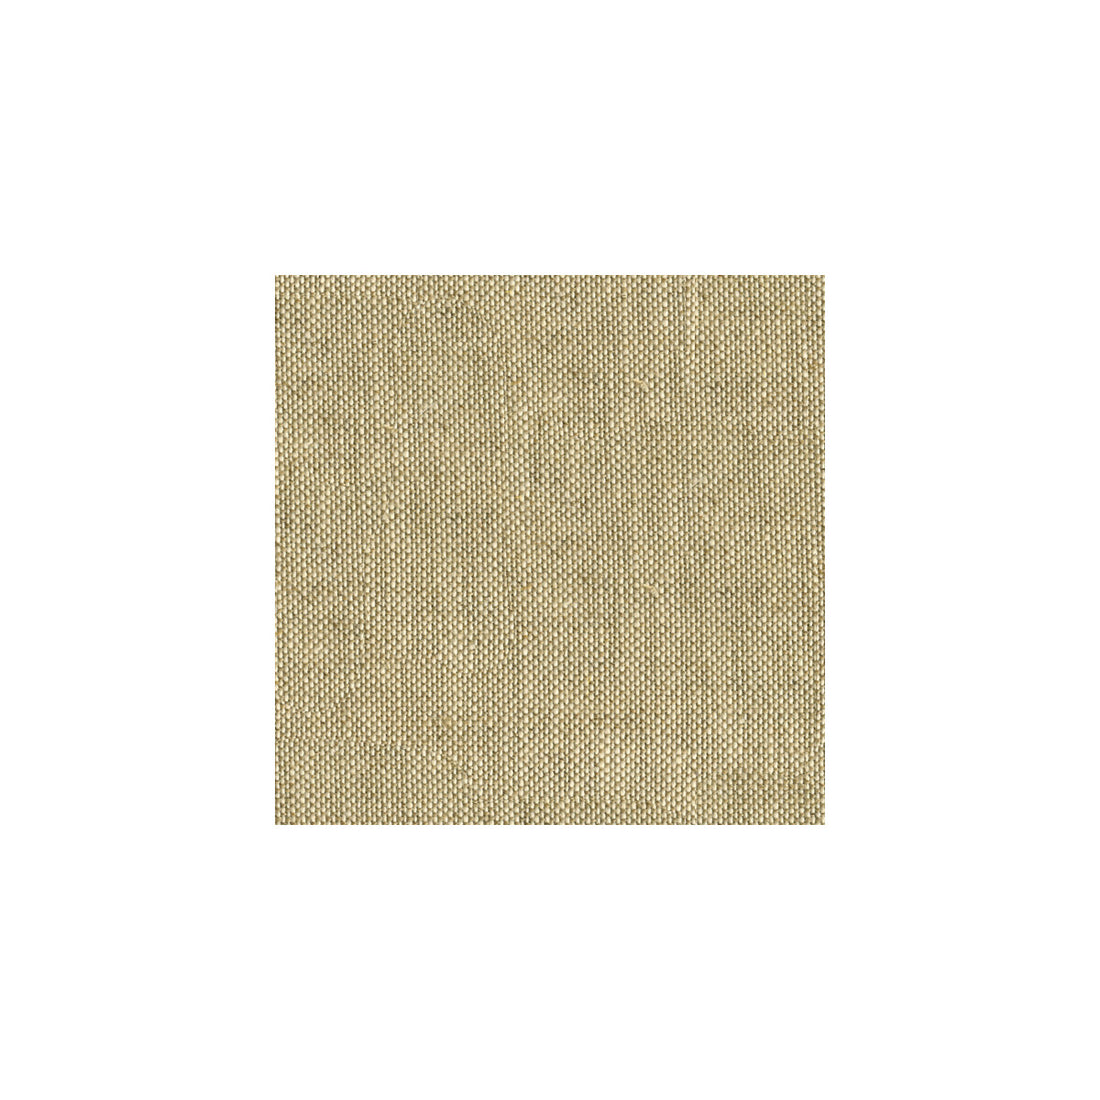 Kravet Basics fabric in 32296-16 color - pattern 32296.16.0 - by Kravet Basics in the Perfect Plains collection